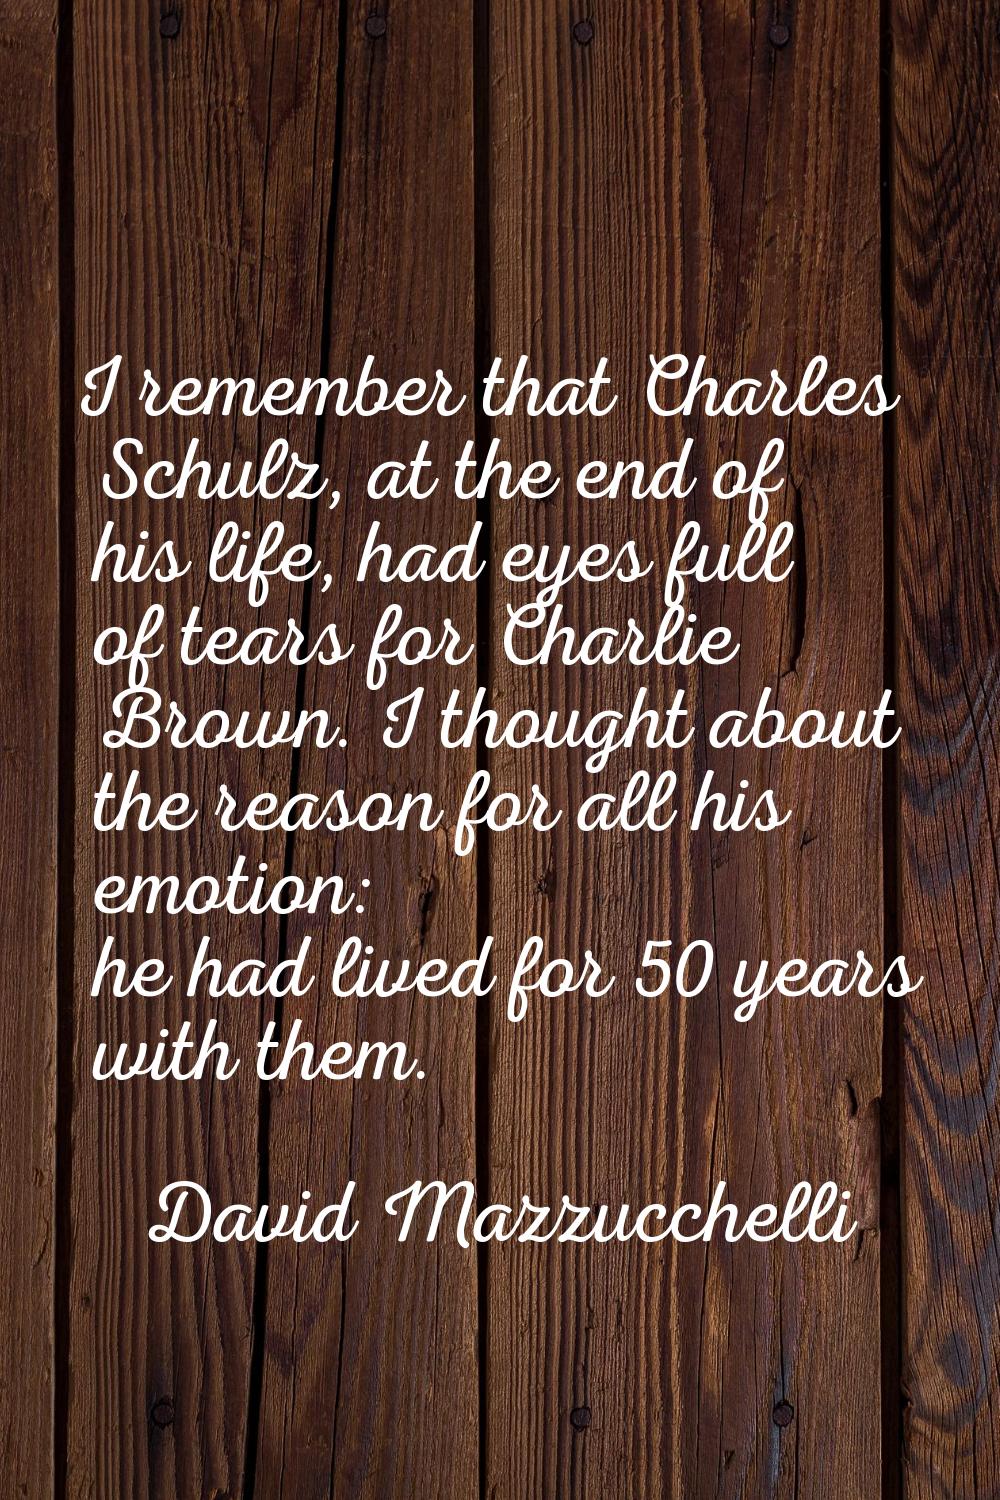 I remember that Charles Schulz, at the end of his life, had eyes full of tears for Charlie Brown. I